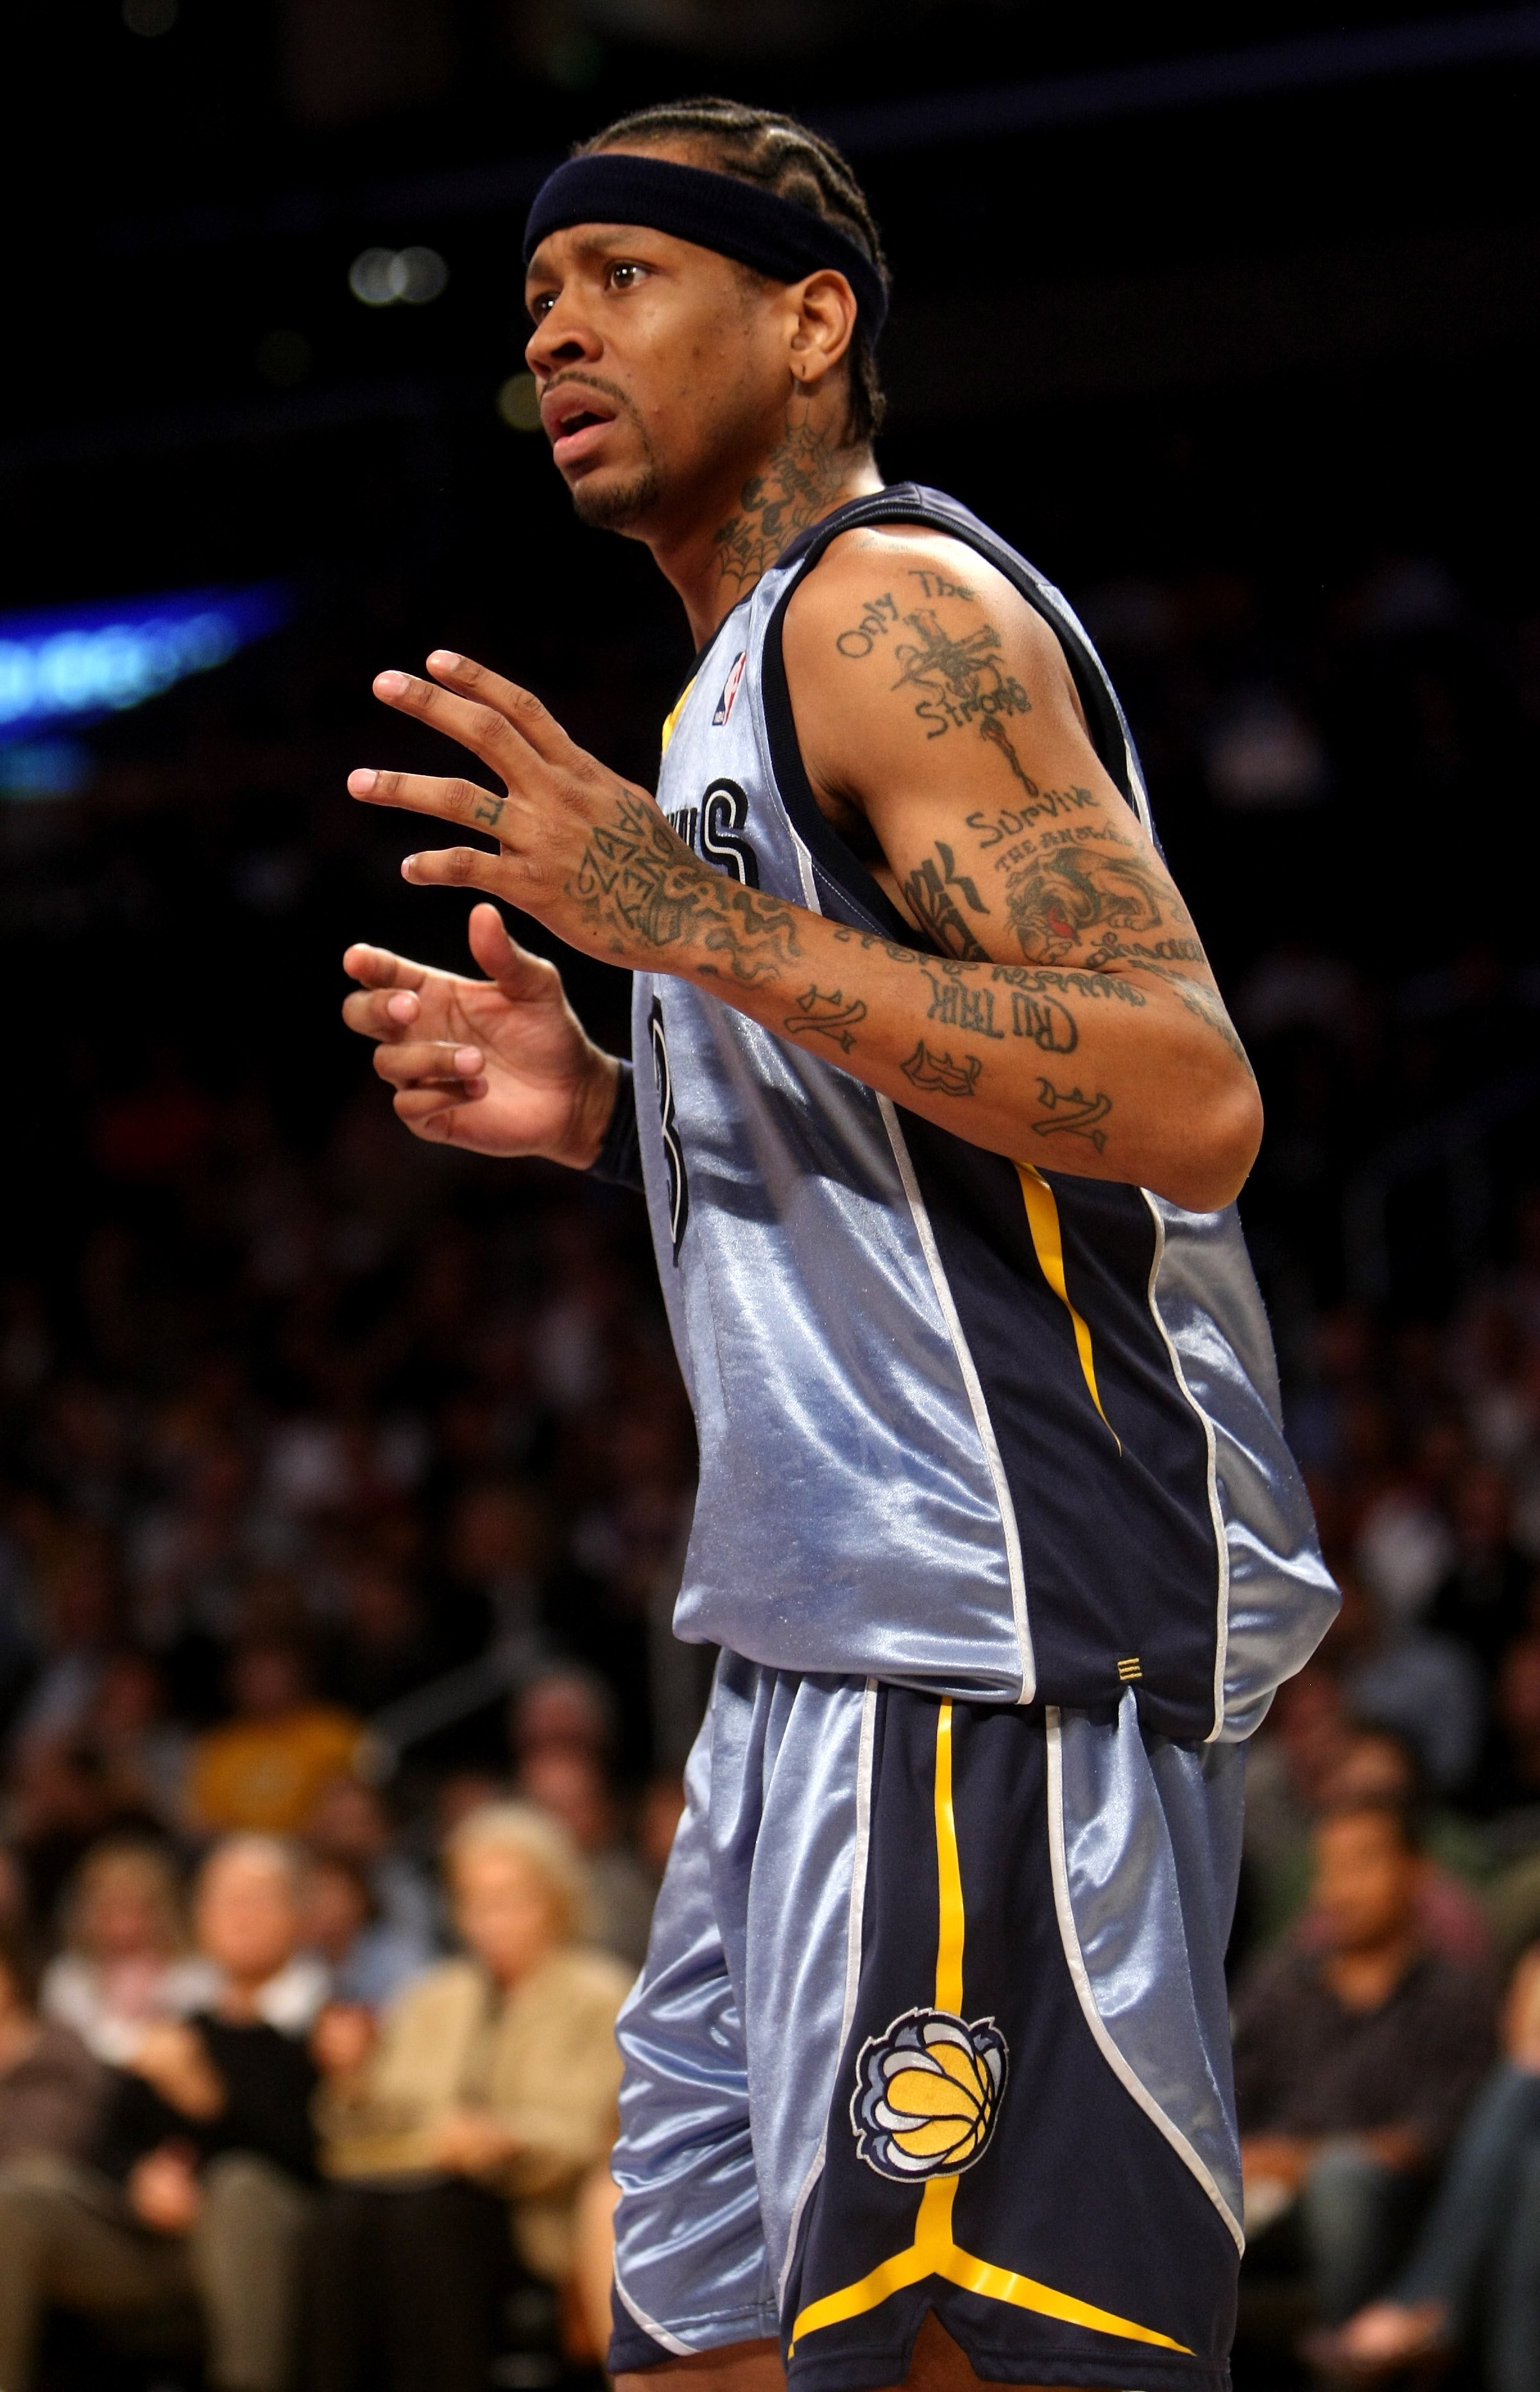 LOS ANGELES, CA - NOVEMBER 06:  Allen Iverson #3 of the Memphis Grizzlies on the court against the Los Angeles Lakers on November 6, 2009 at Staples Center in Los Angeles, California. The Lakers won 114-98. NOTE TO USER: User expressly acknowledges and ag